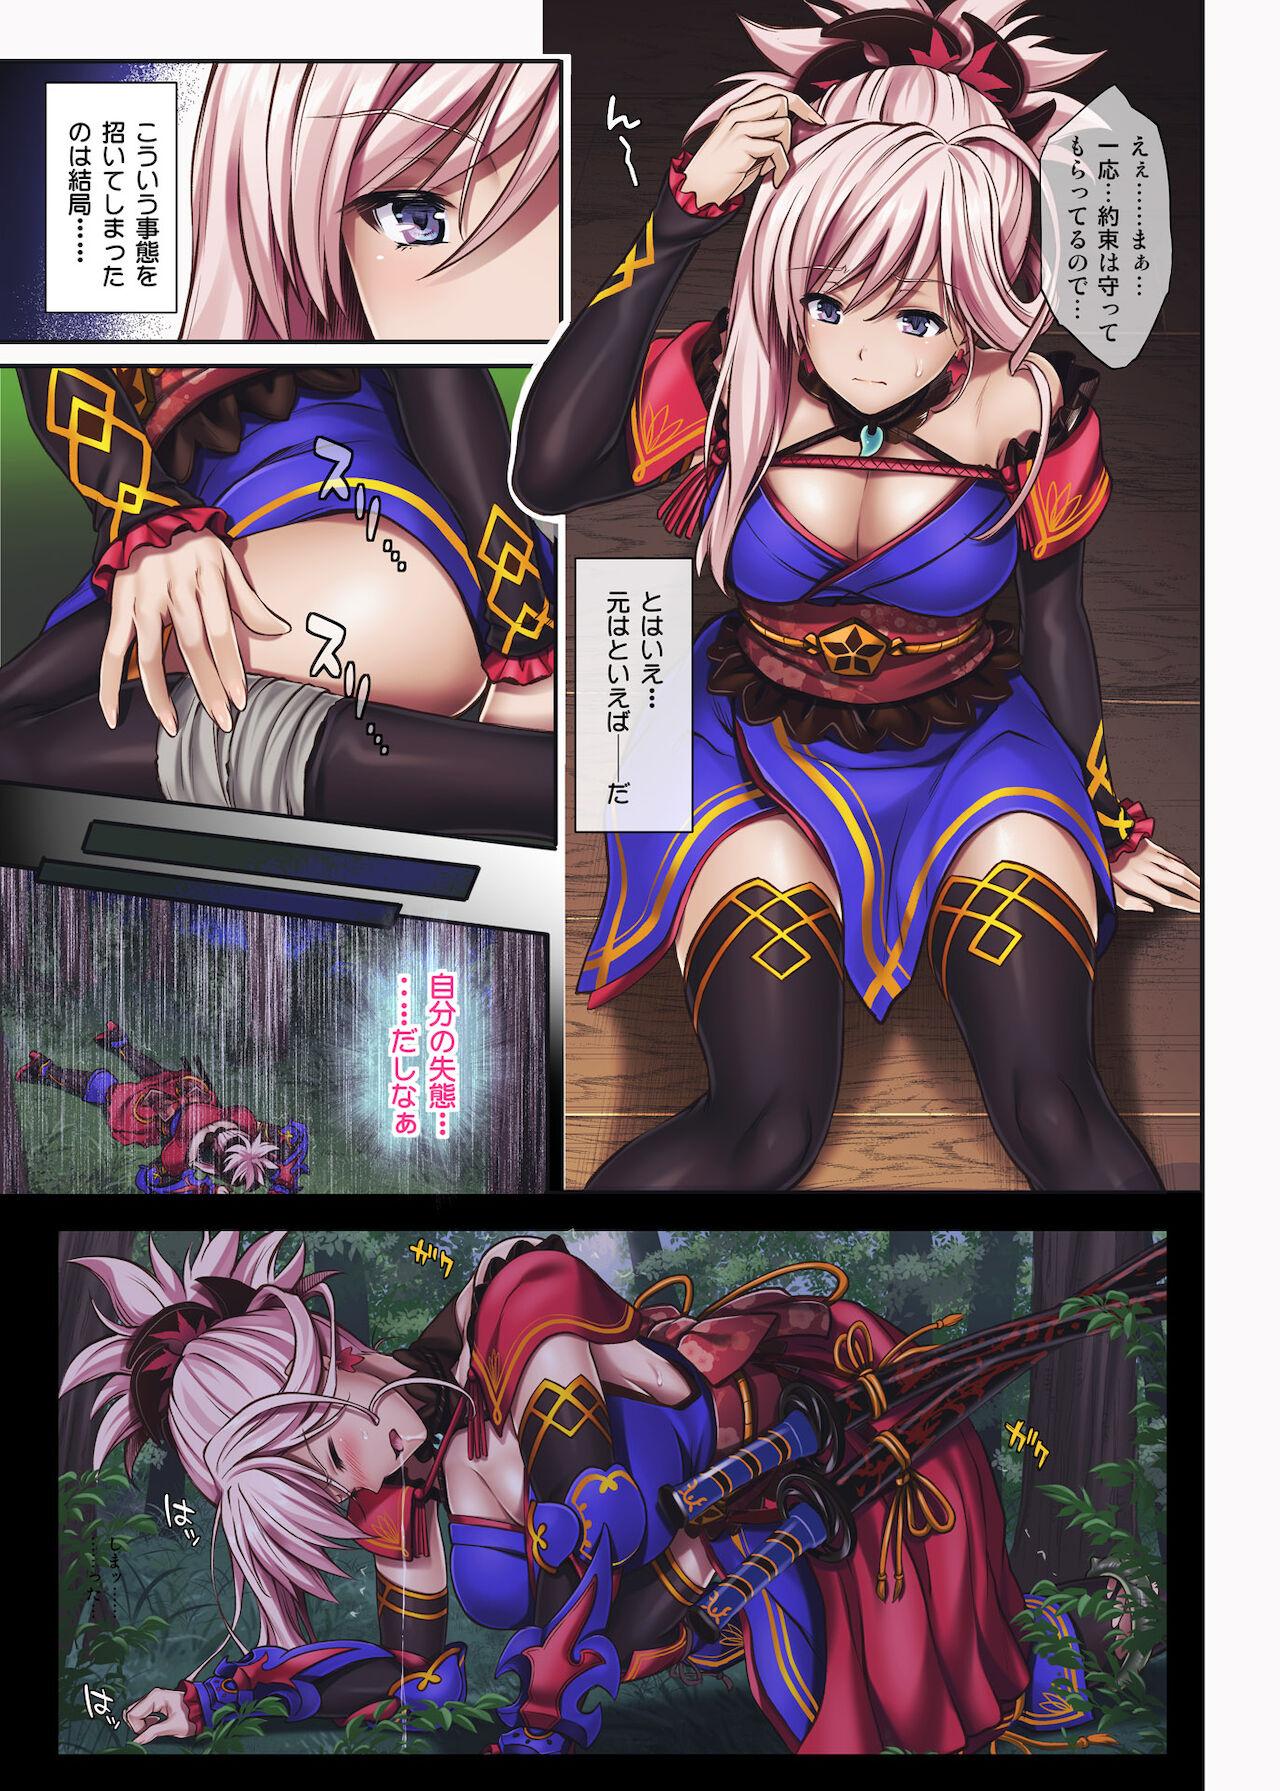 Gay Cyclone no Doujinshi Full Color Pack 4 - Fate grand order Boy - Page 6